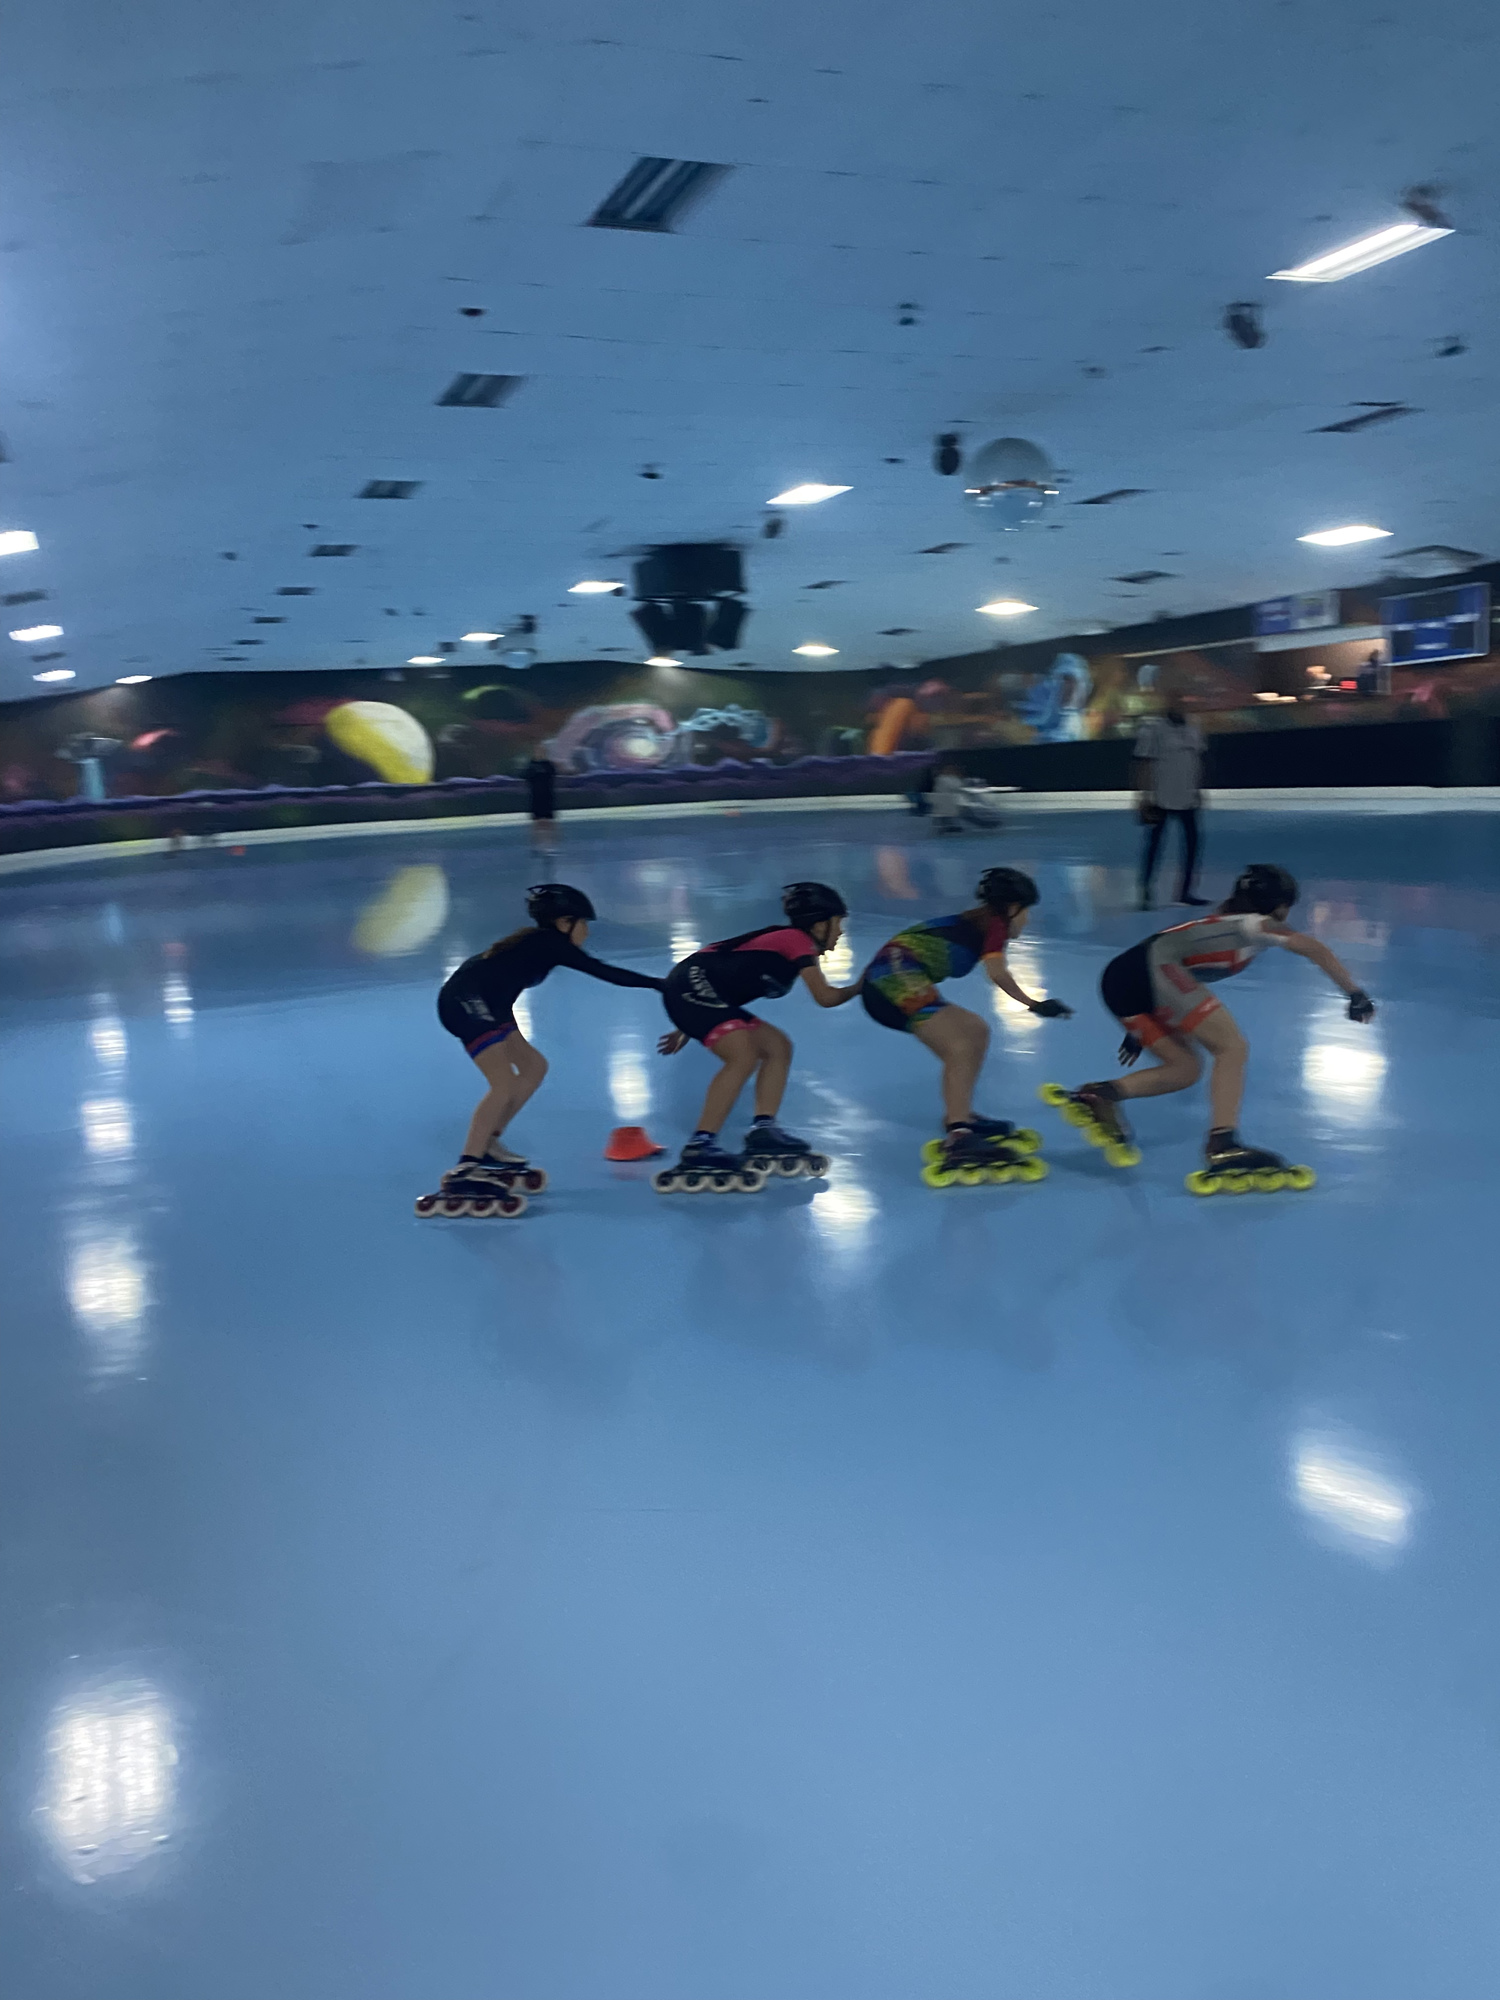 Speed skaters show off their skills on the rink. Courtesy photo